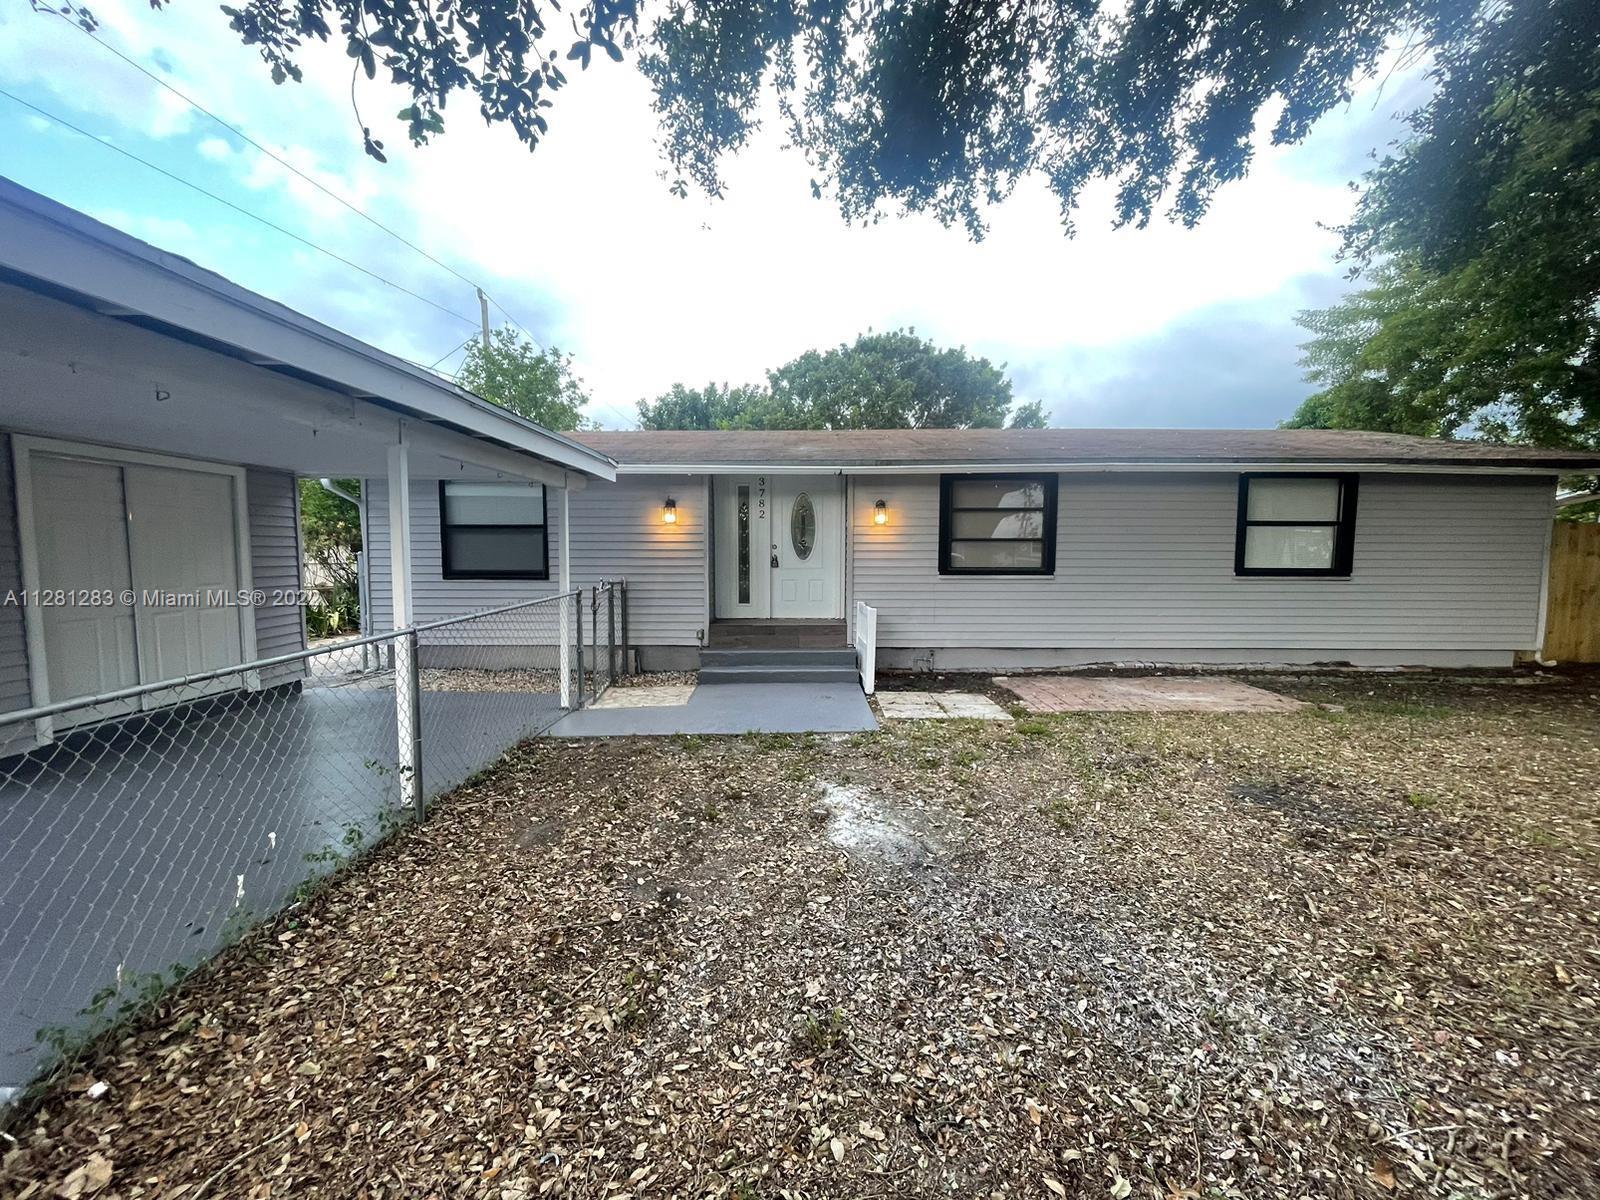 Fully remodeled 3 bed 2 bath house, Brand new drive way as well as being freshly painted indoors and